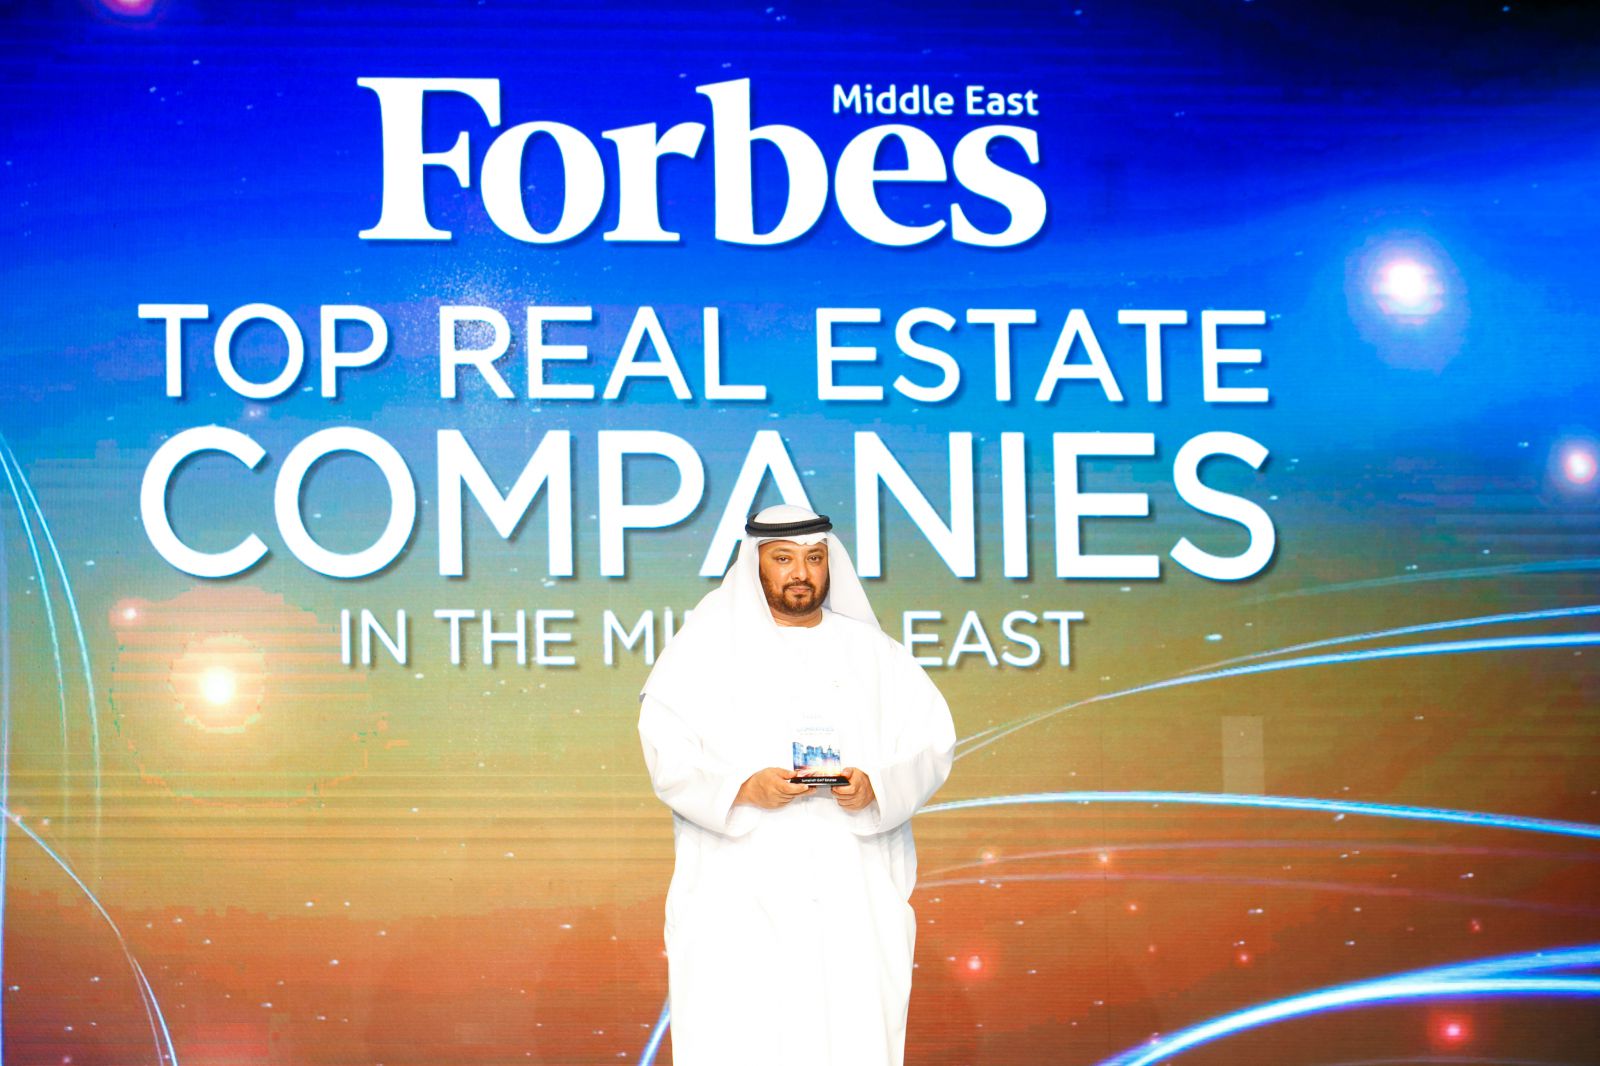 JUMEIRAH GOLF ESTATES NAMED ONE OF THE TOP 100 REALESTATE COMPANIES IN THE MIDDLE EAST